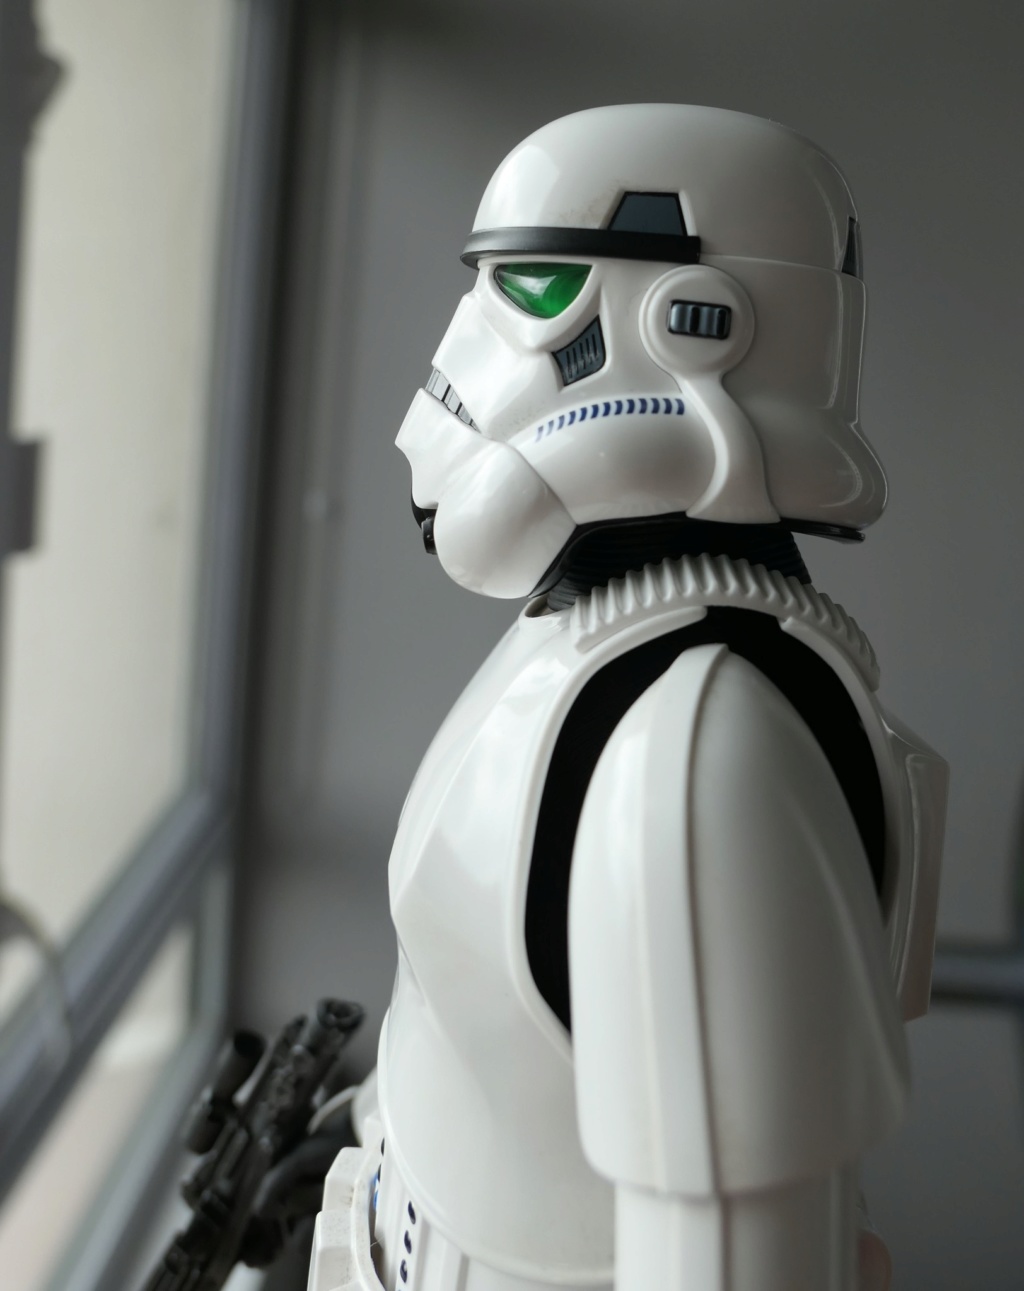 NEW PRODUCT: HOT TOYS: STAR WARS STORMTROOPER (DELUXE VERSION) 1/6TH SCALE COLLECTIBLE FIGURE 2h6slc10